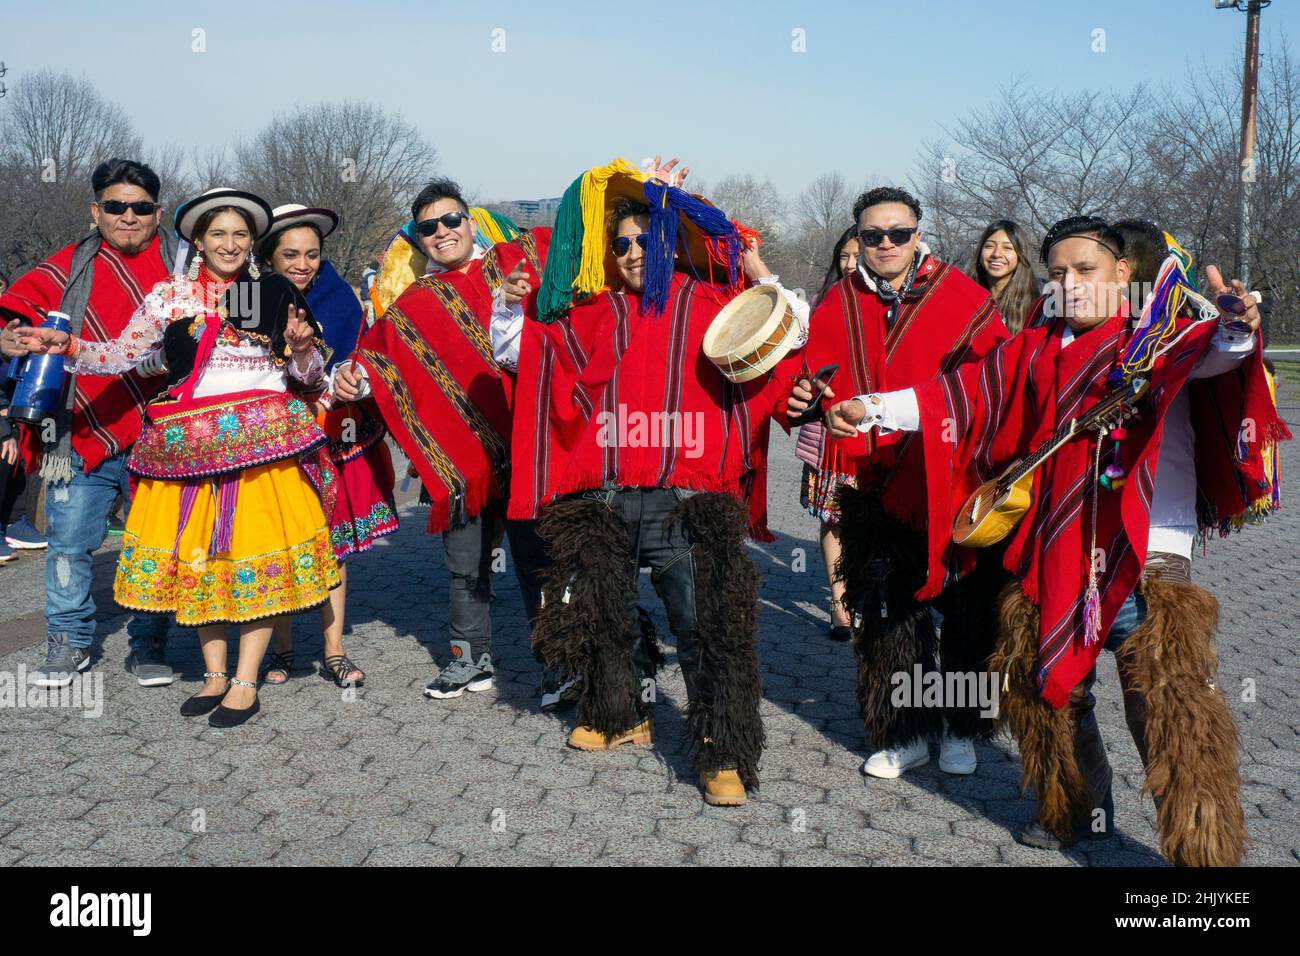 Posed group photo of Ecuadorian dancers & musicians at Flushing Meadows Corona park for a video shoot. In Queens, New York City, a very diverse place. Stock Photo